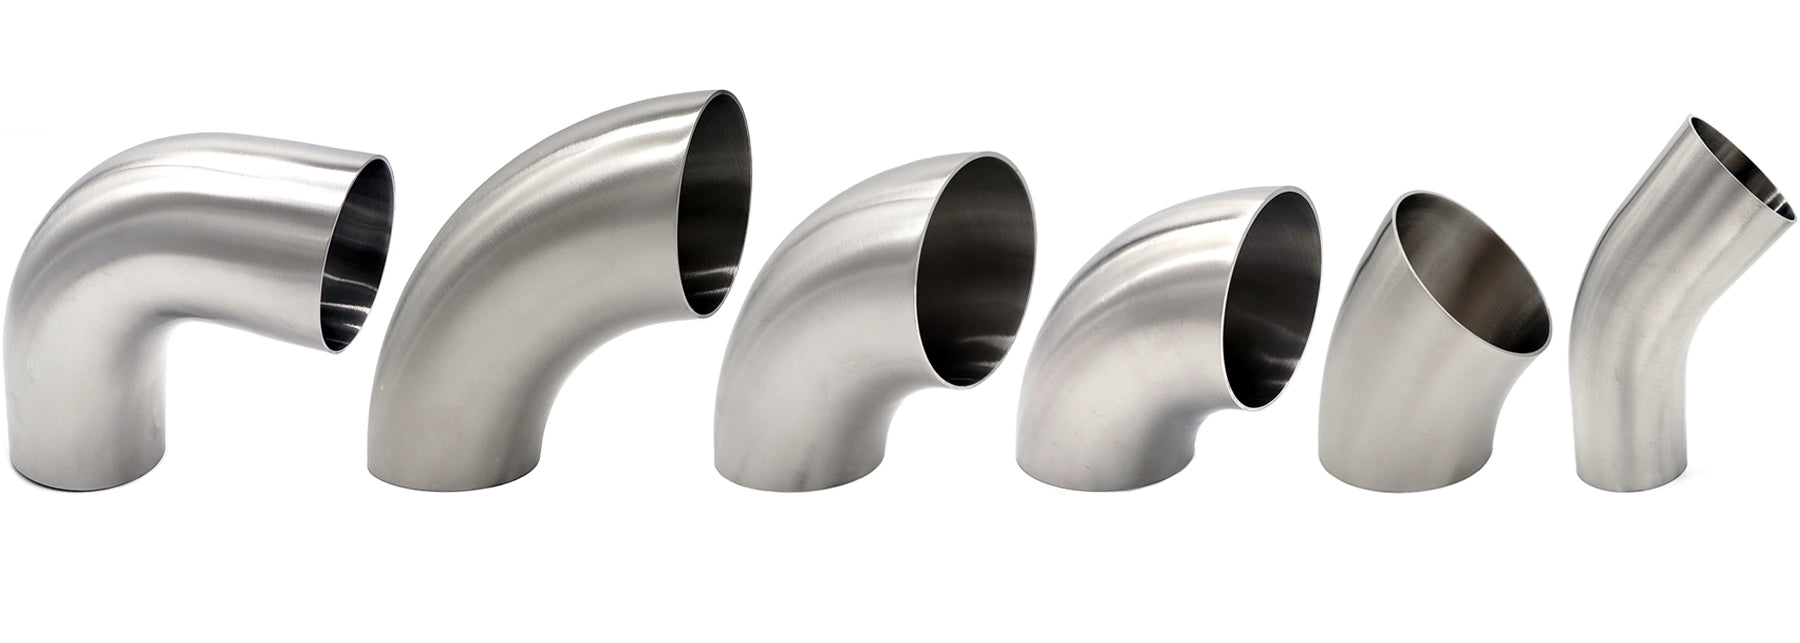 Stainless Exhaust Bends | Ace Race Parts